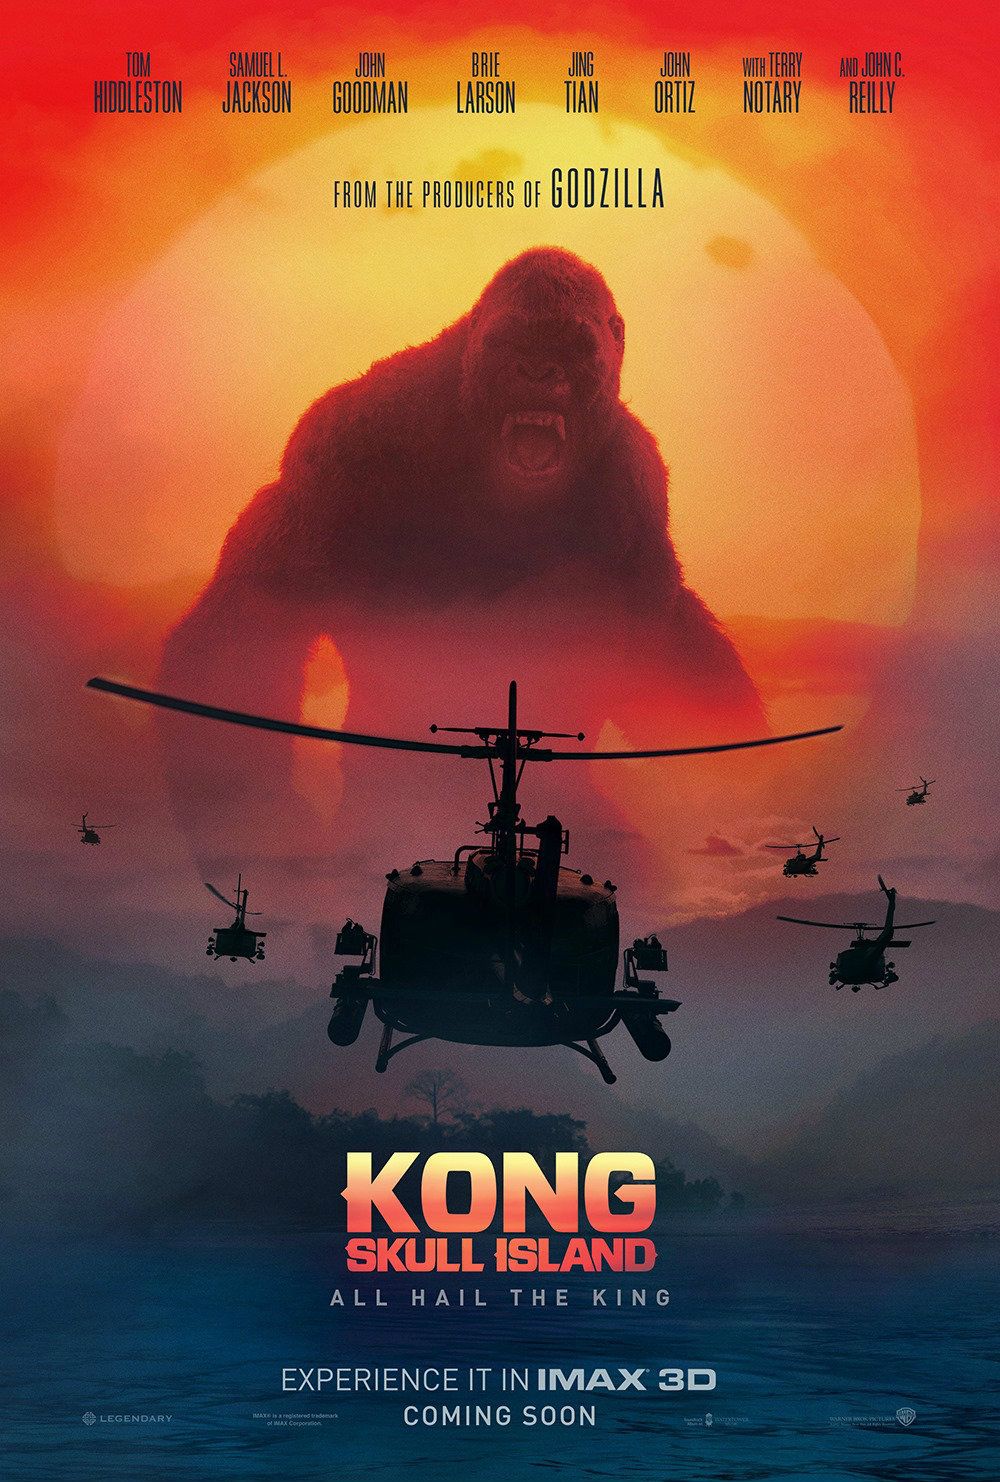 Kong: Skull Island IMAX Poster – A Poster Fit For A King